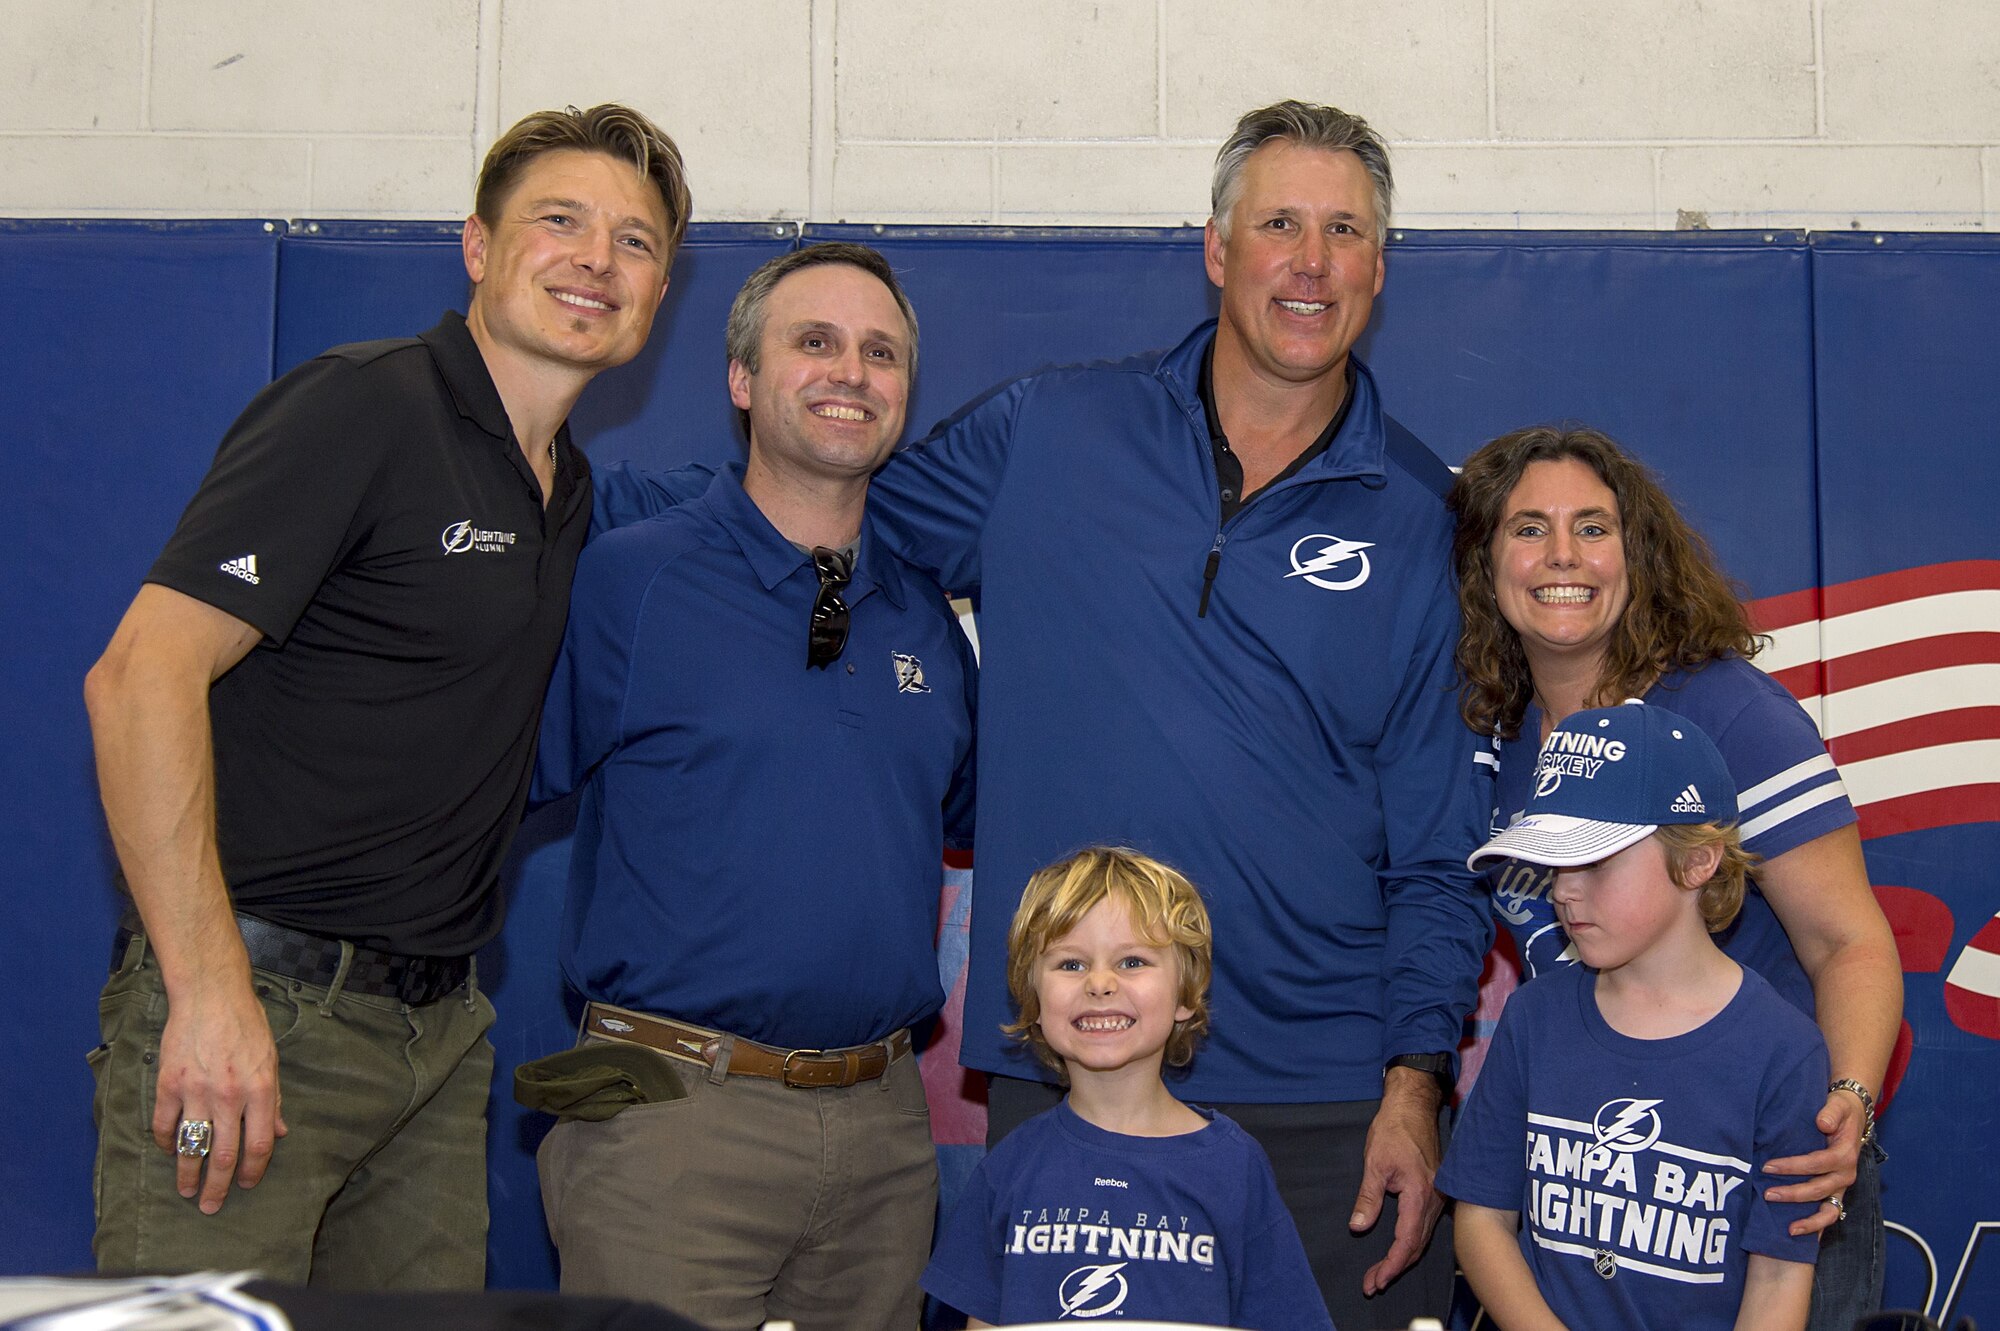 A family pauses for a photo with former Tampa Bay Lightning players, Ruslan Fedetenko and Dave Andreychuk, during their visit to MacDill Air Force Base, Fla., Jan. 24, 2018. The former players visited ahead of the National Hockey League All-Star game, which is scheduled to be held at AMALIE Arena, Tampa , Fla.